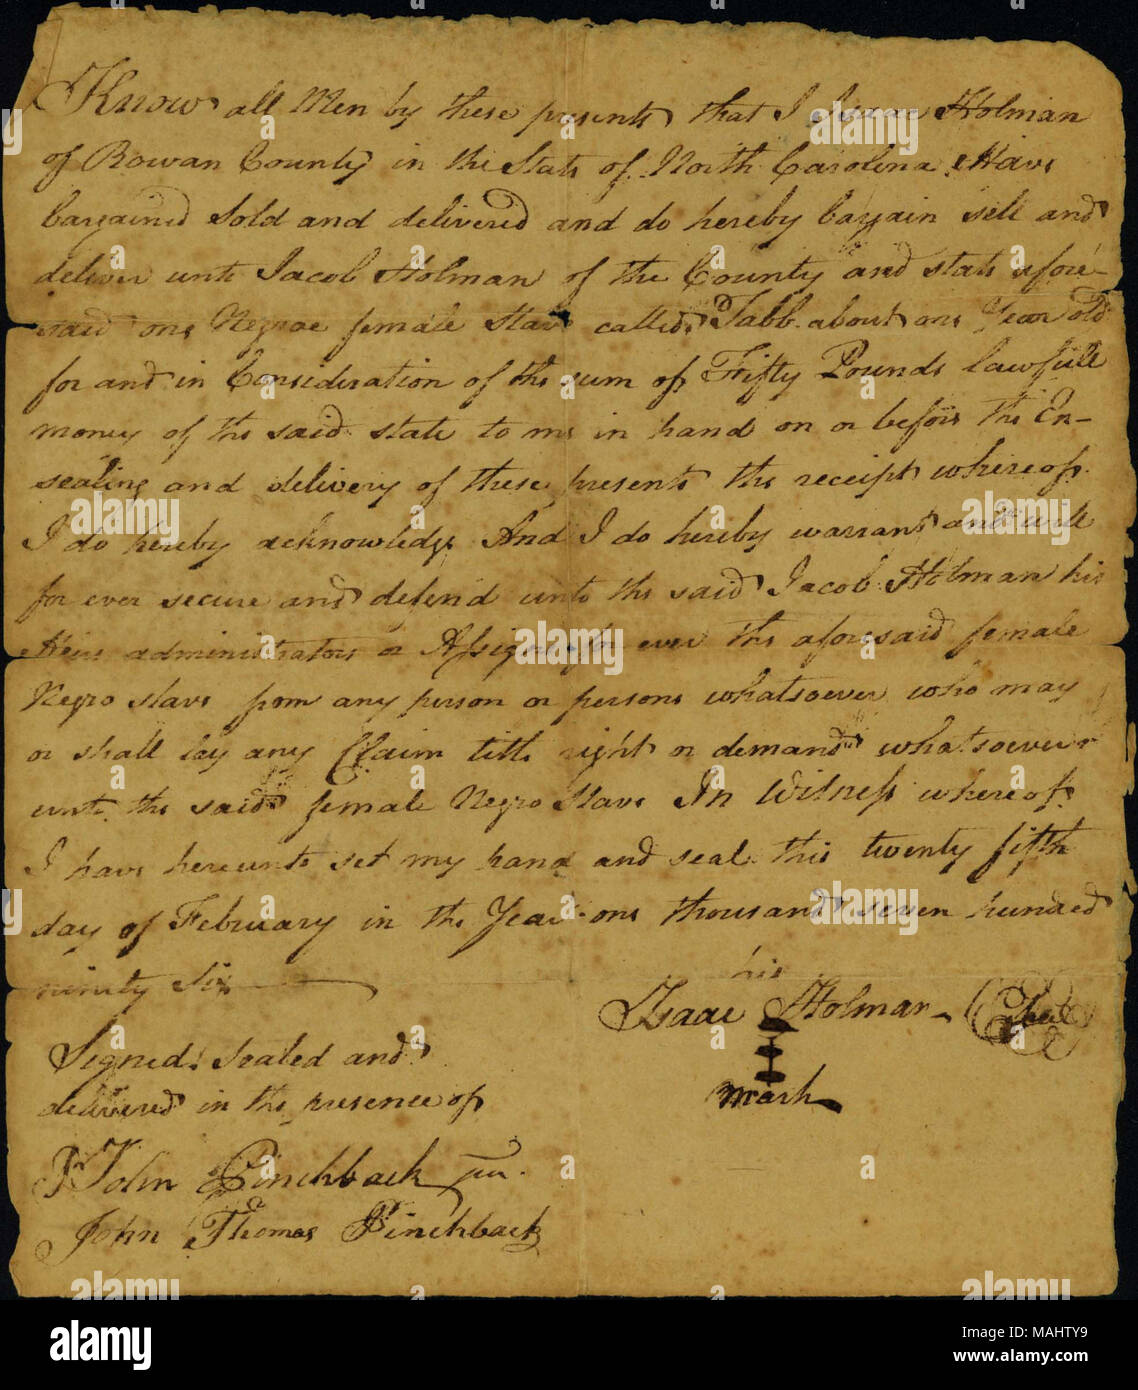 Sold by Isaac Holman of Rowan County, North Carolina, to Jacob Holman, also of Rowan County. [Notation on the back of the document certifies that the bill of sale was registered, October 19, 1796.] Title: Receipt for the sale of a one-year-old female slave named Tabb, February 25, 1796  . 25 February 1796. Holman, Isaac Stock Photo